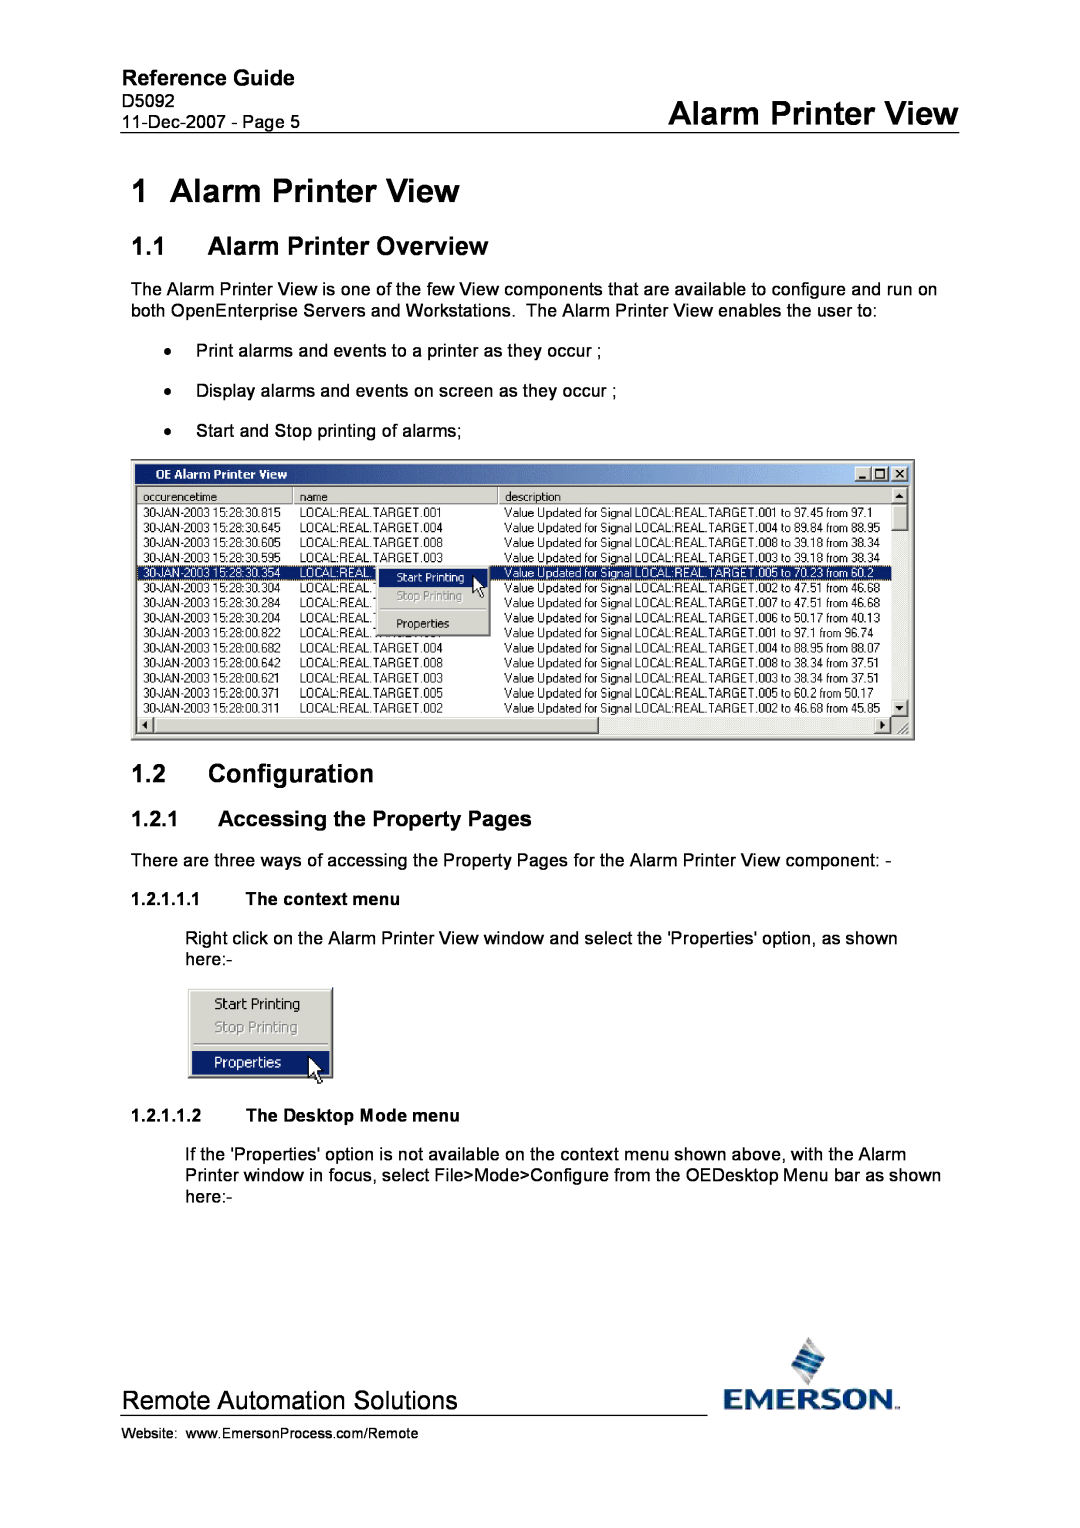 Emerson Process Management D5092 Alarm Printer View, Alarm Printer Overview, Configuration, Accessing the Property Pages 